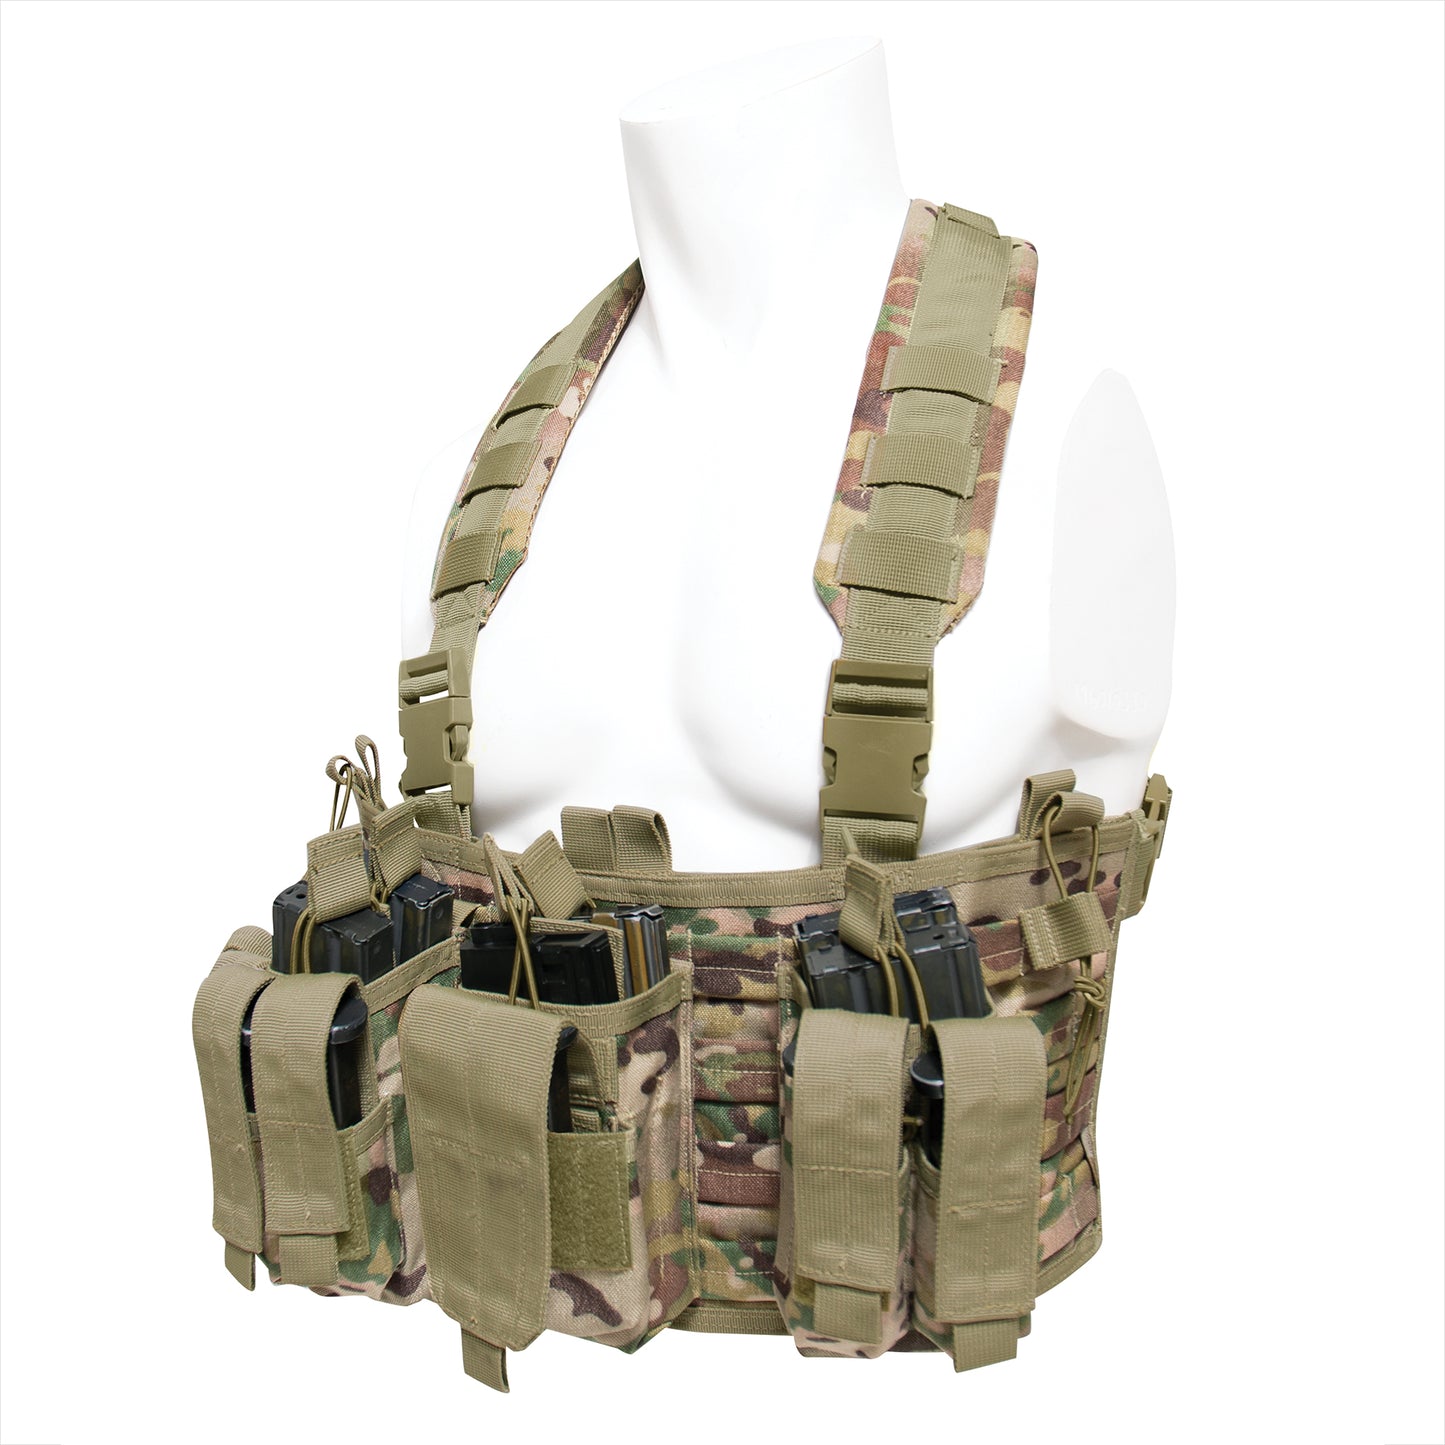 Operators Chest Rig - MOLLE Tactical Vest With Pouches